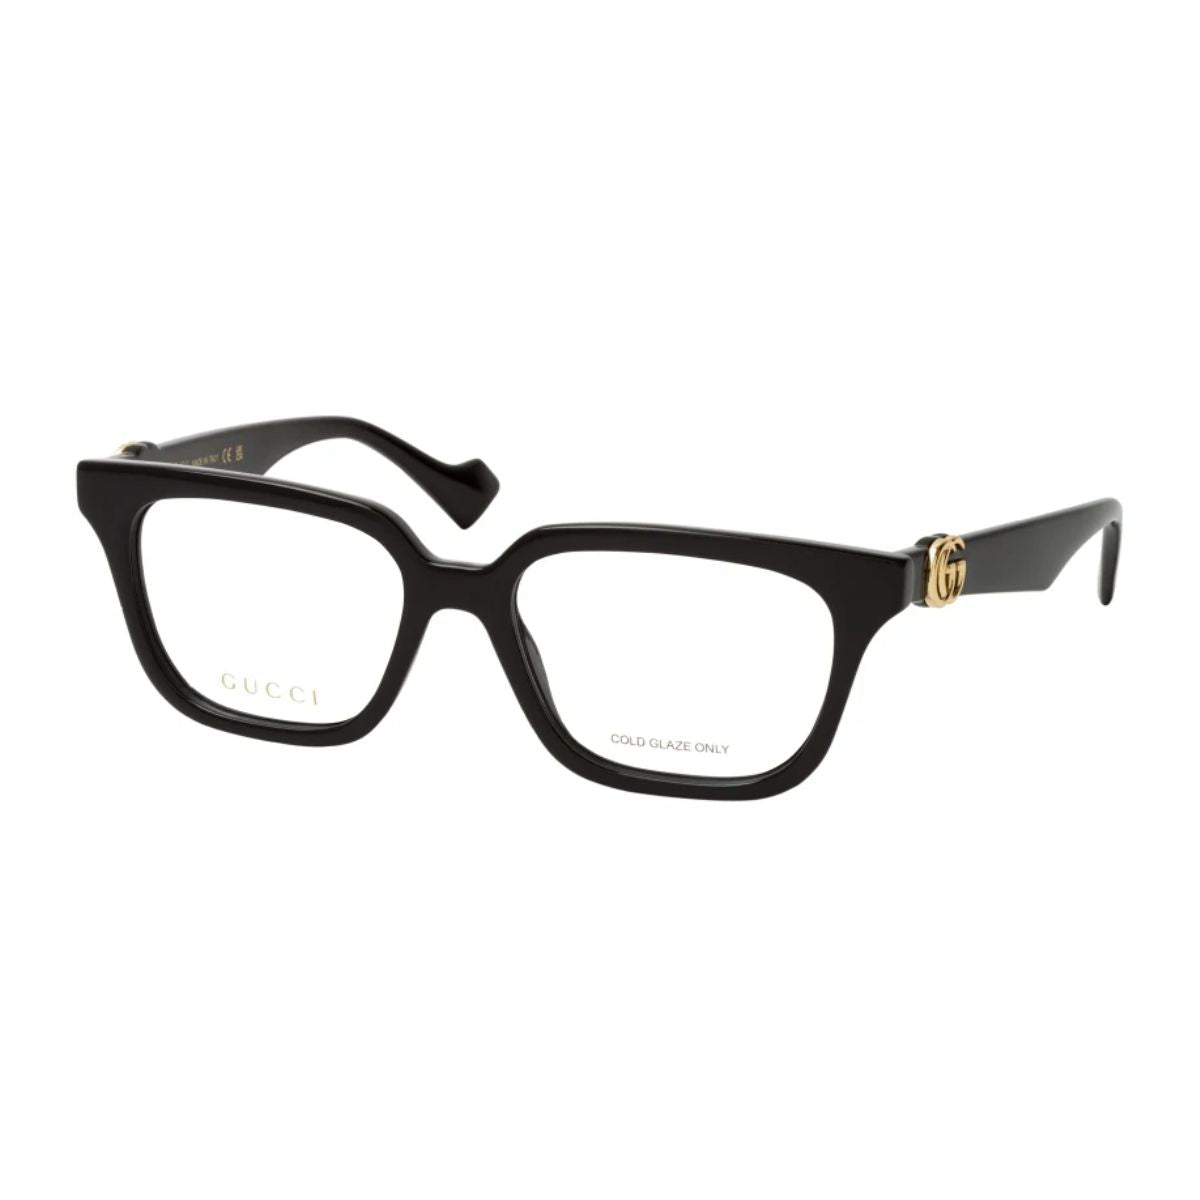 "Shop Gucci 1536O 001 Frames for Women - Optorium's Latest Collection"